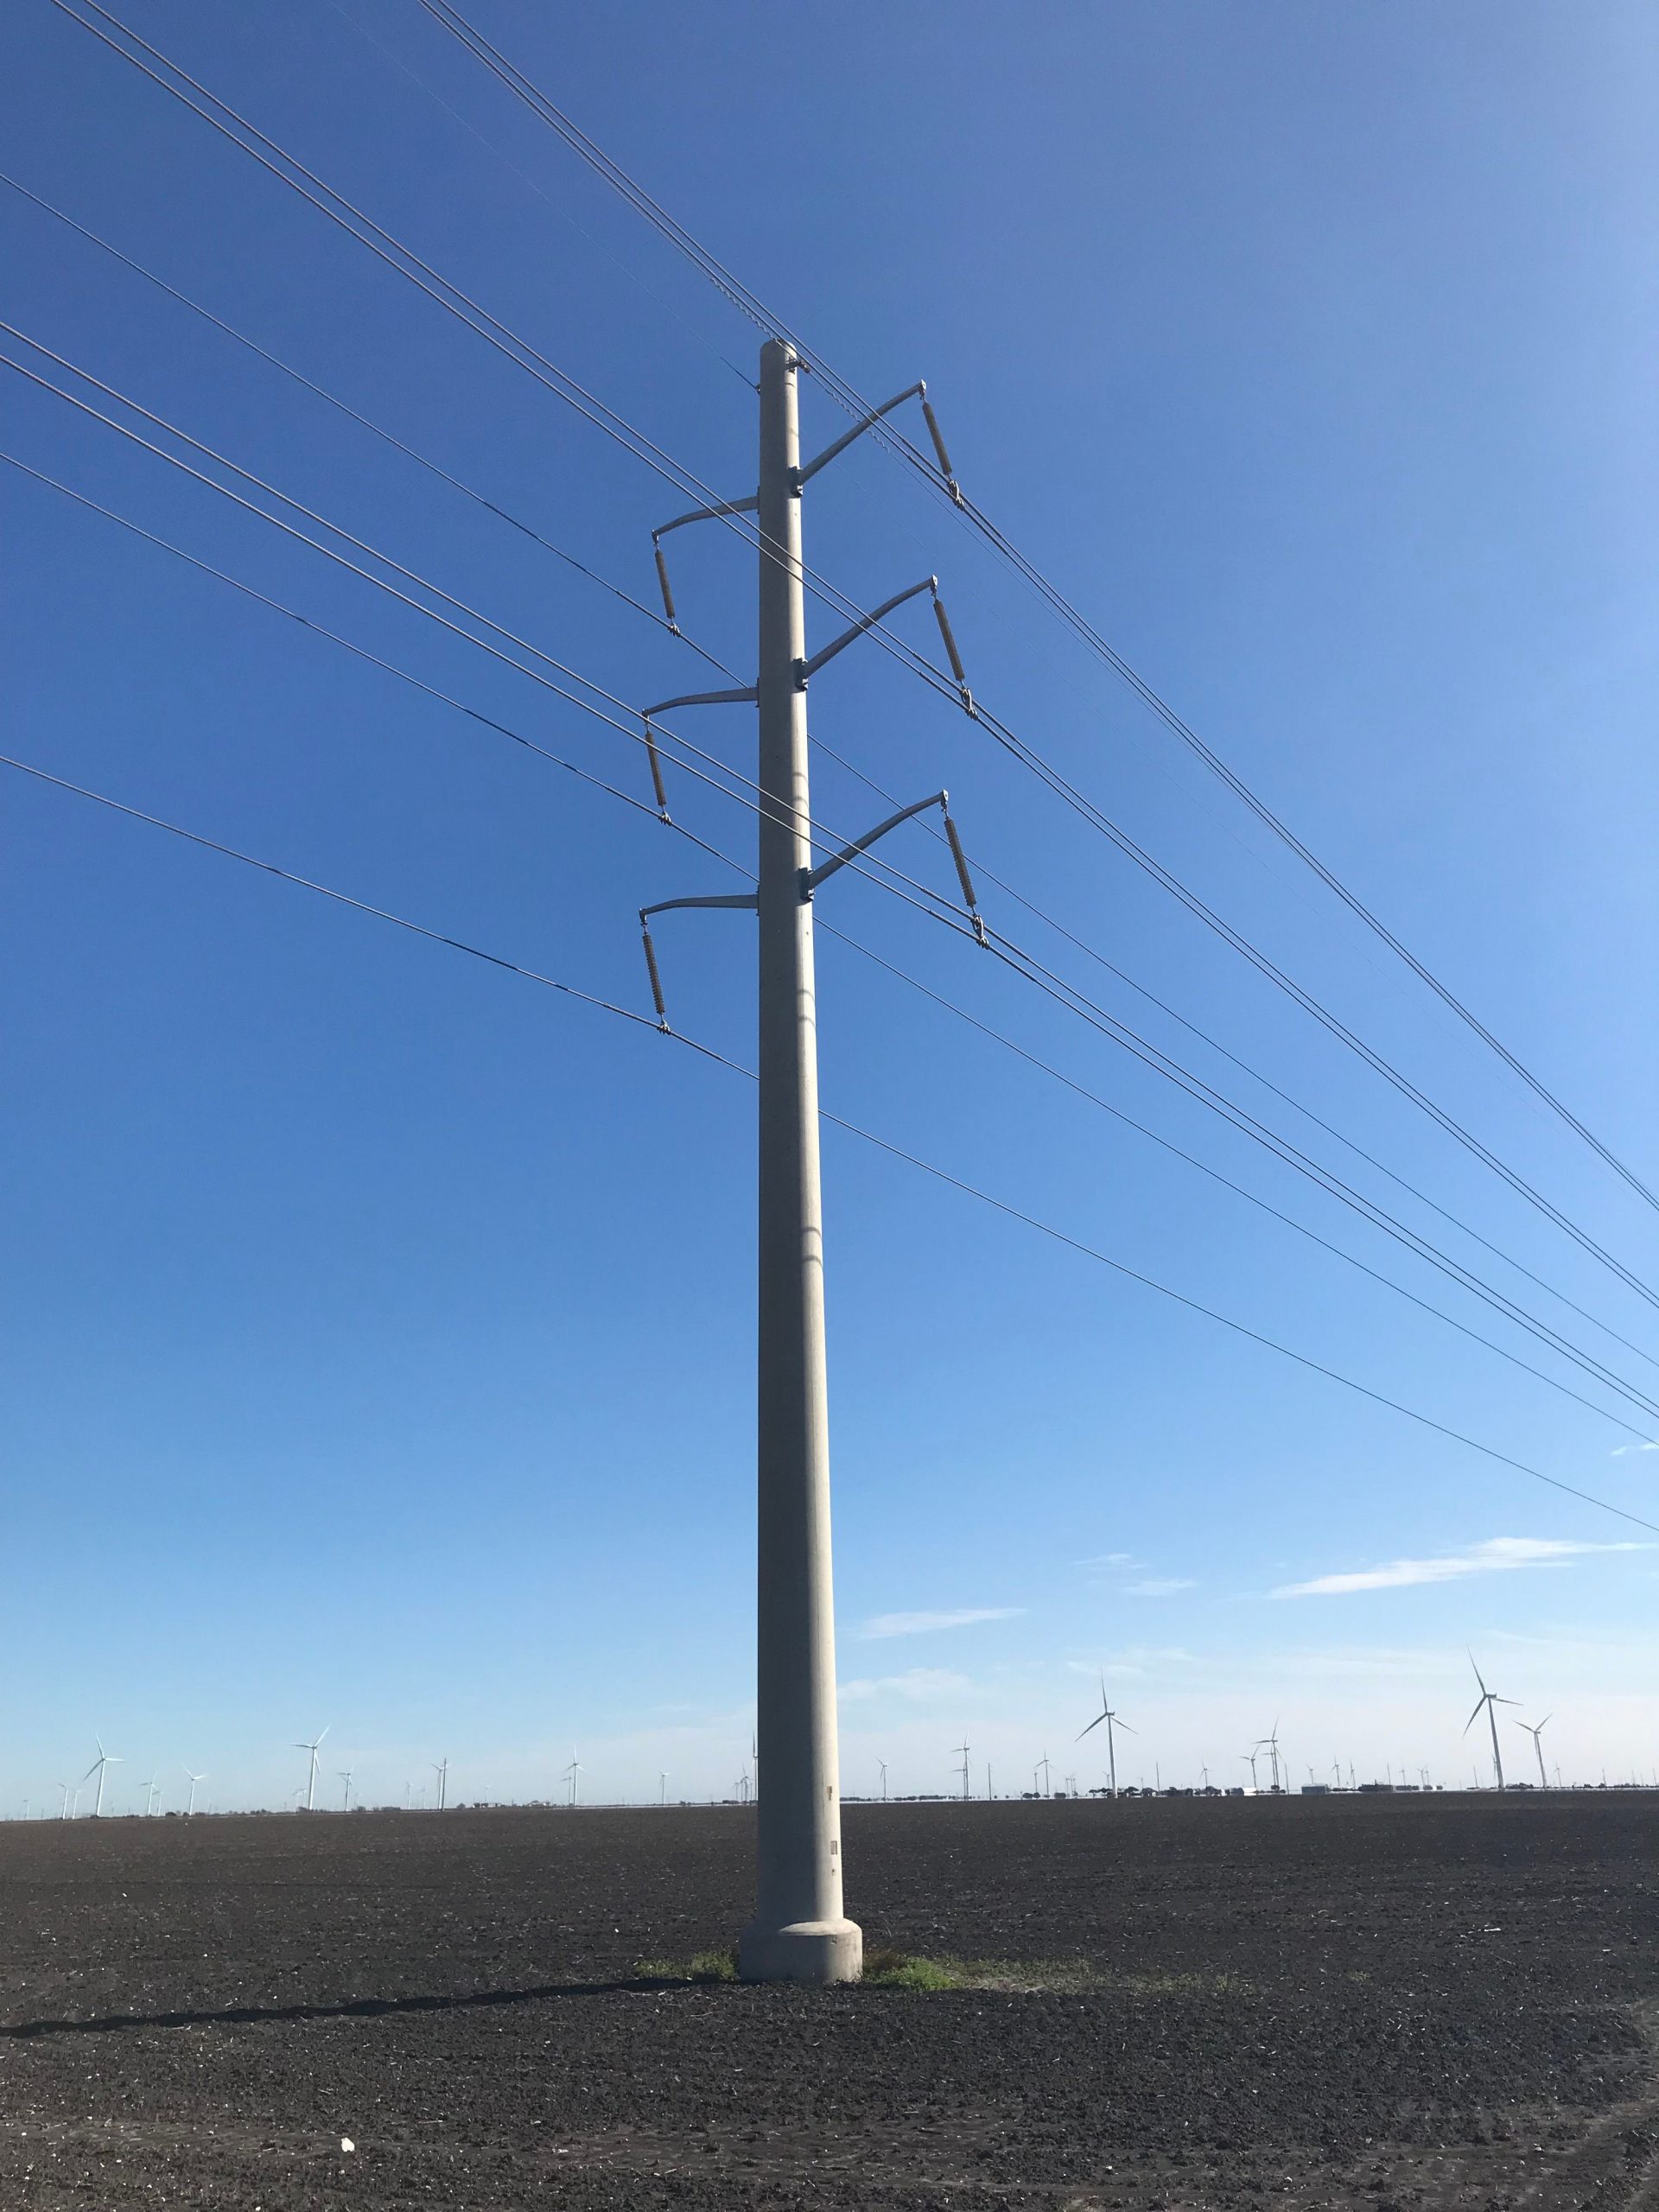 Choose the Best Pole Material for Your Transmission Line